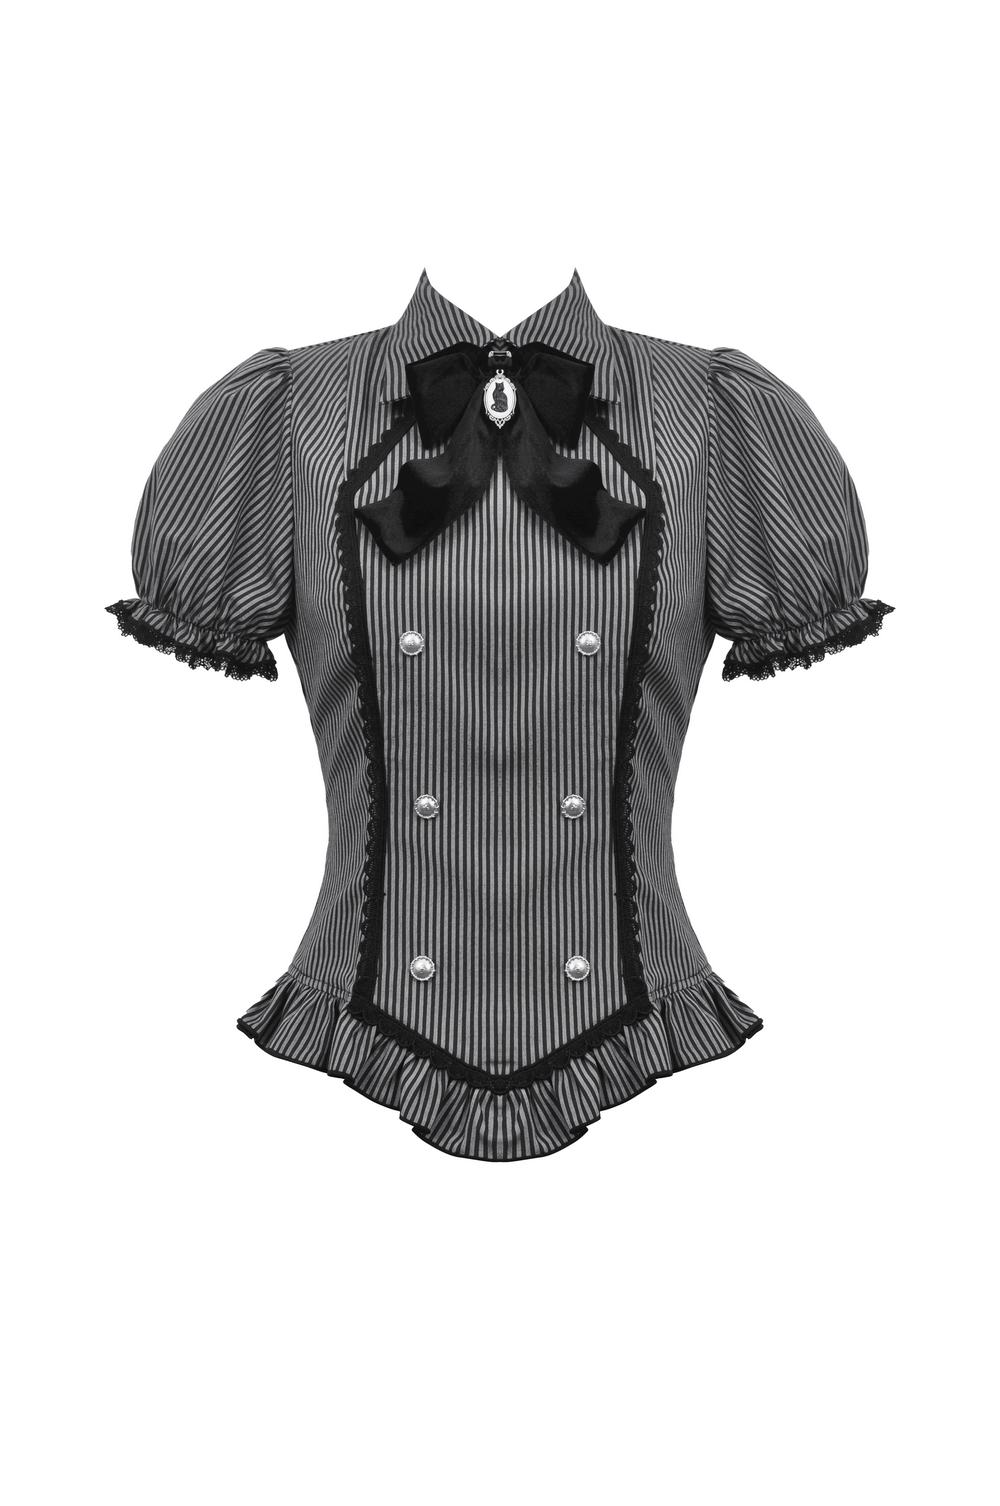 Striped Gothic Blouse with Bow and Lace Details